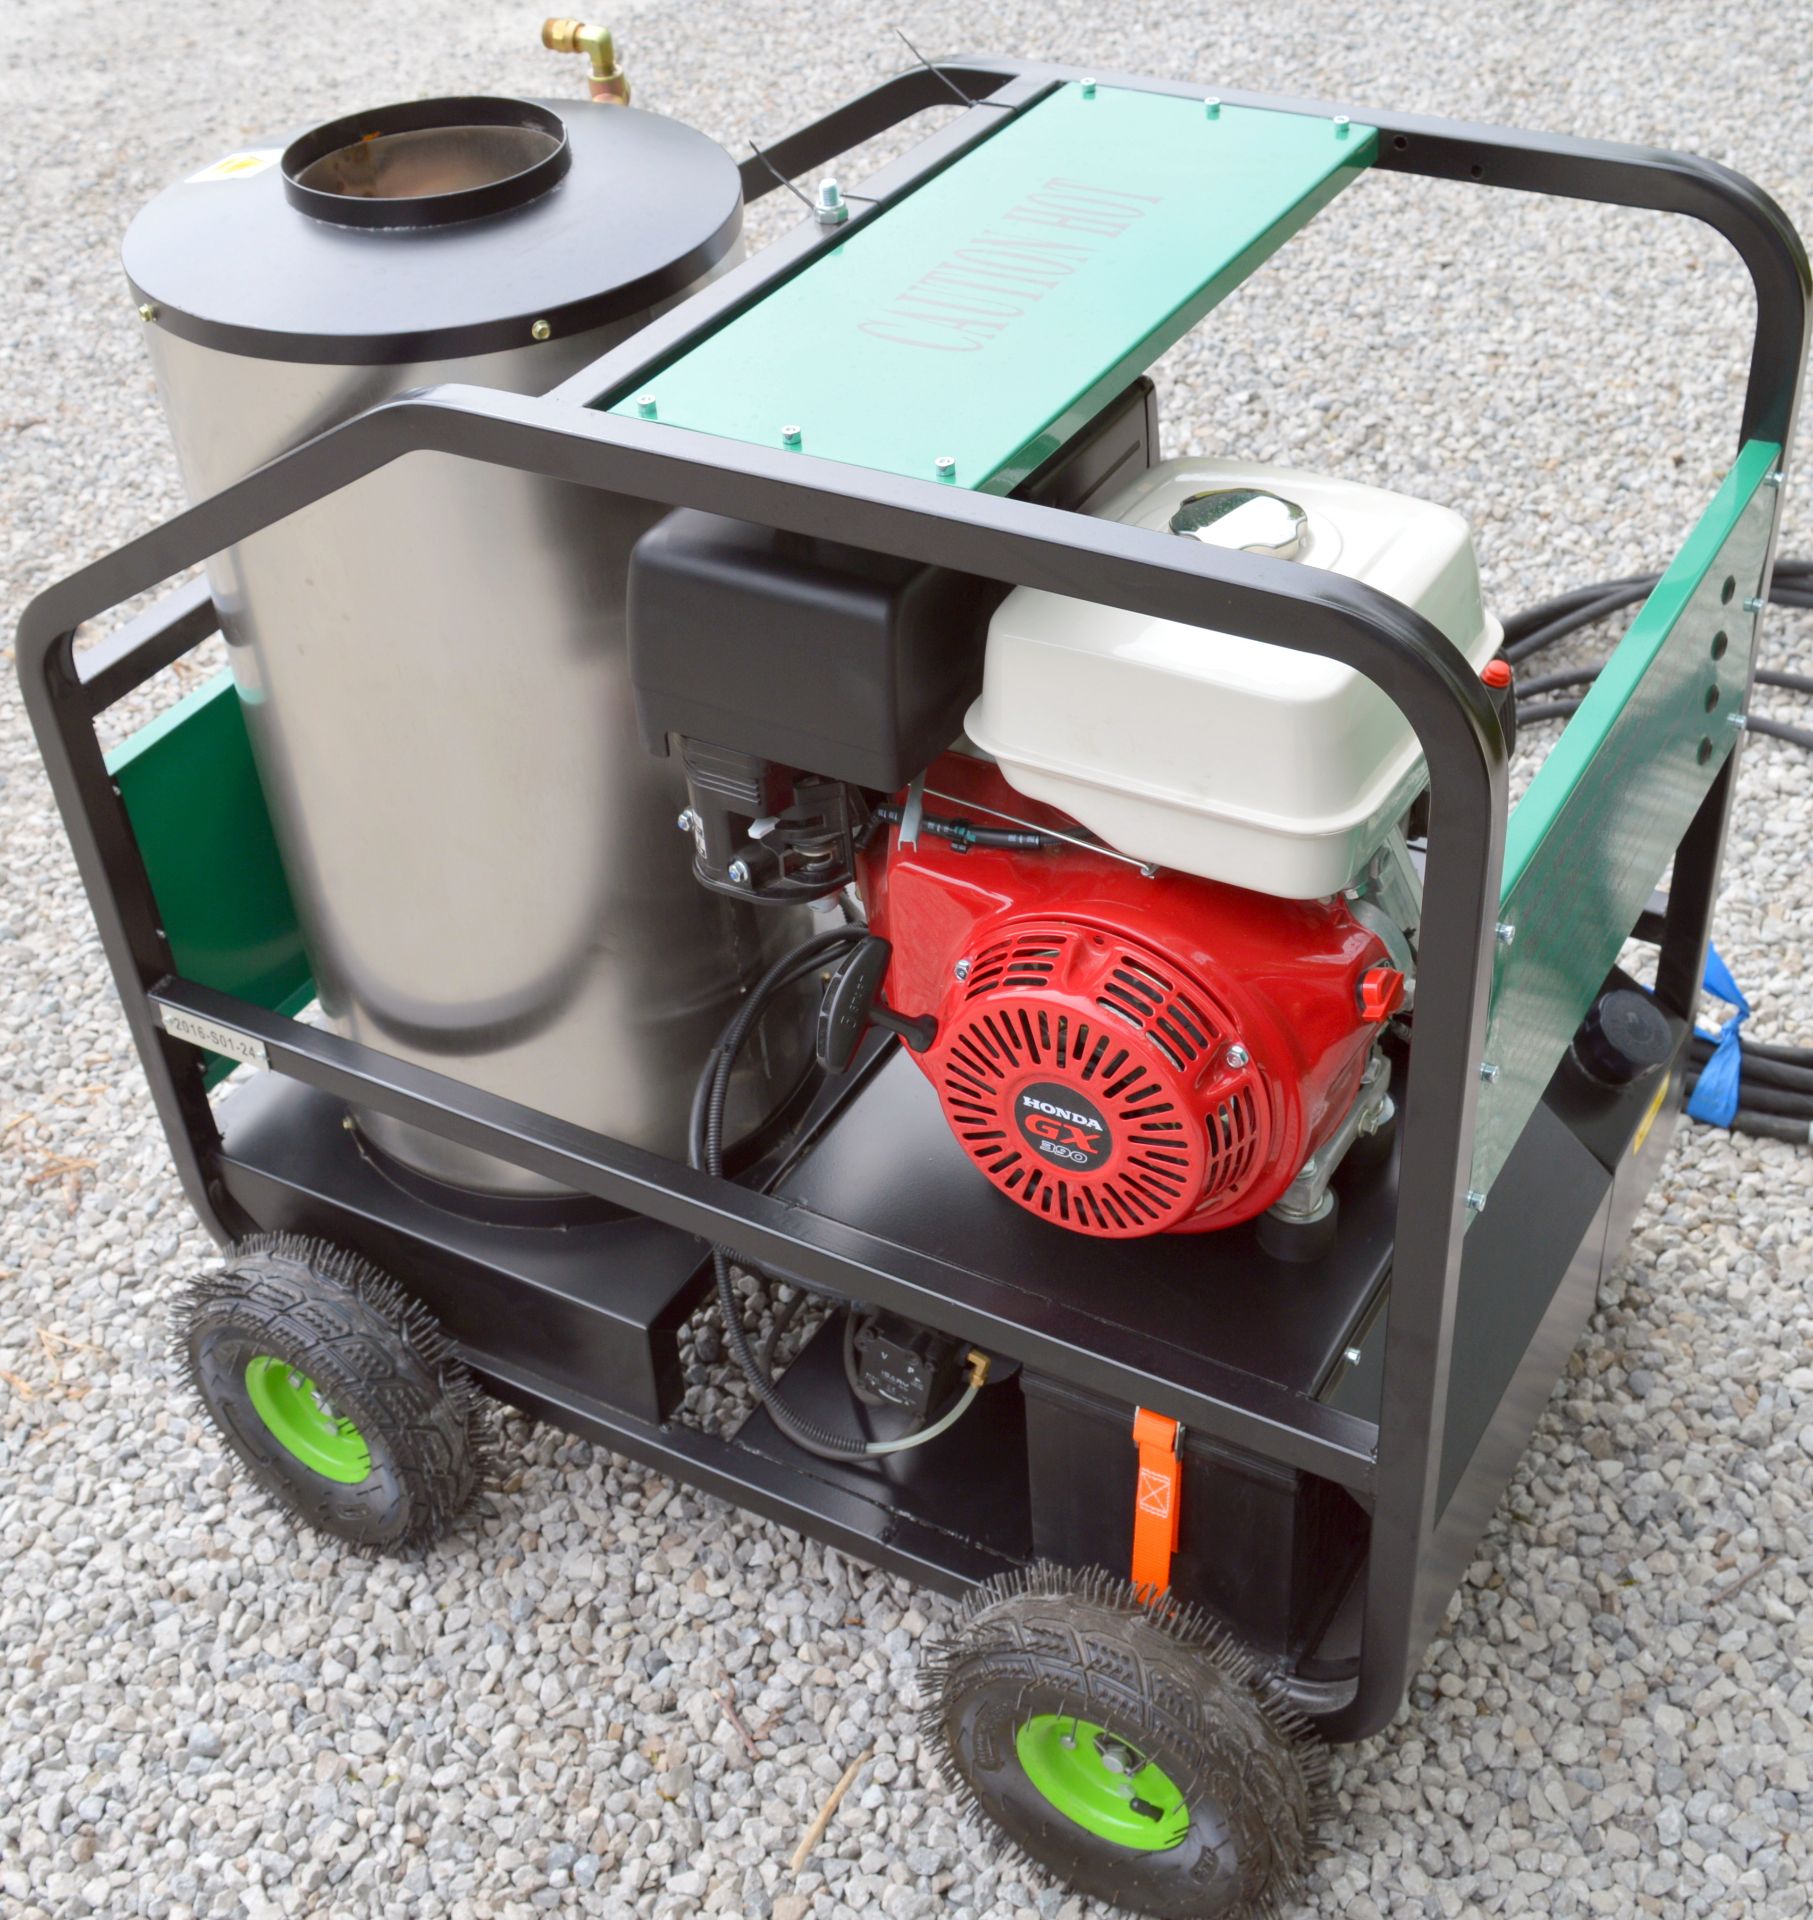 New Industrial Honda Hot Pressure Washer with Warranty - Image 5 of 12